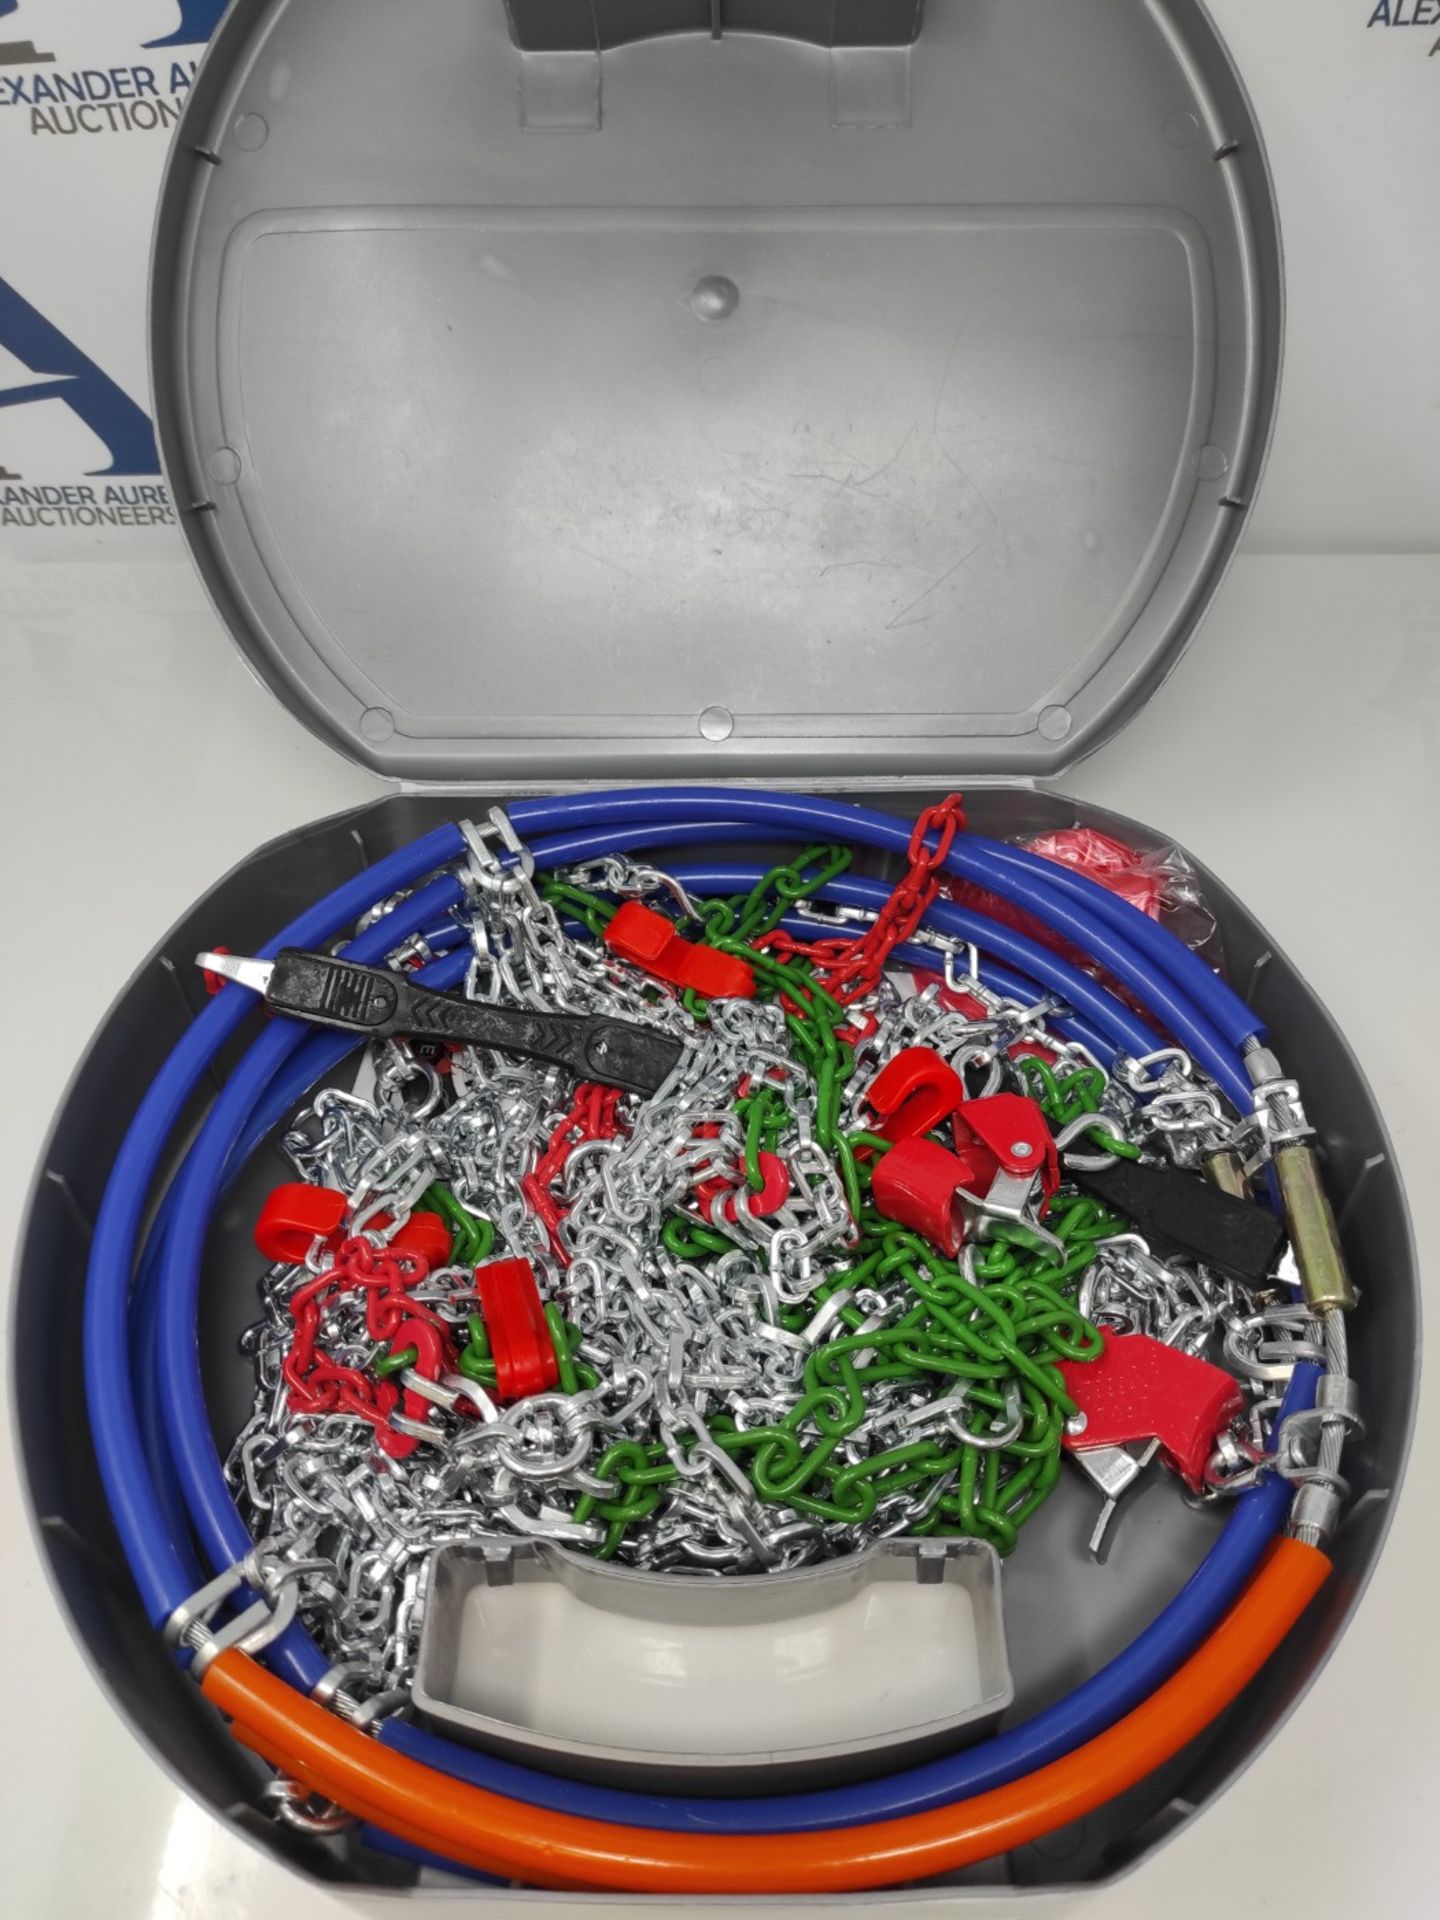 RD9 - Metal snow chains, mm, size No. 90, 2 pieces, including gloves. - Image 6 of 6